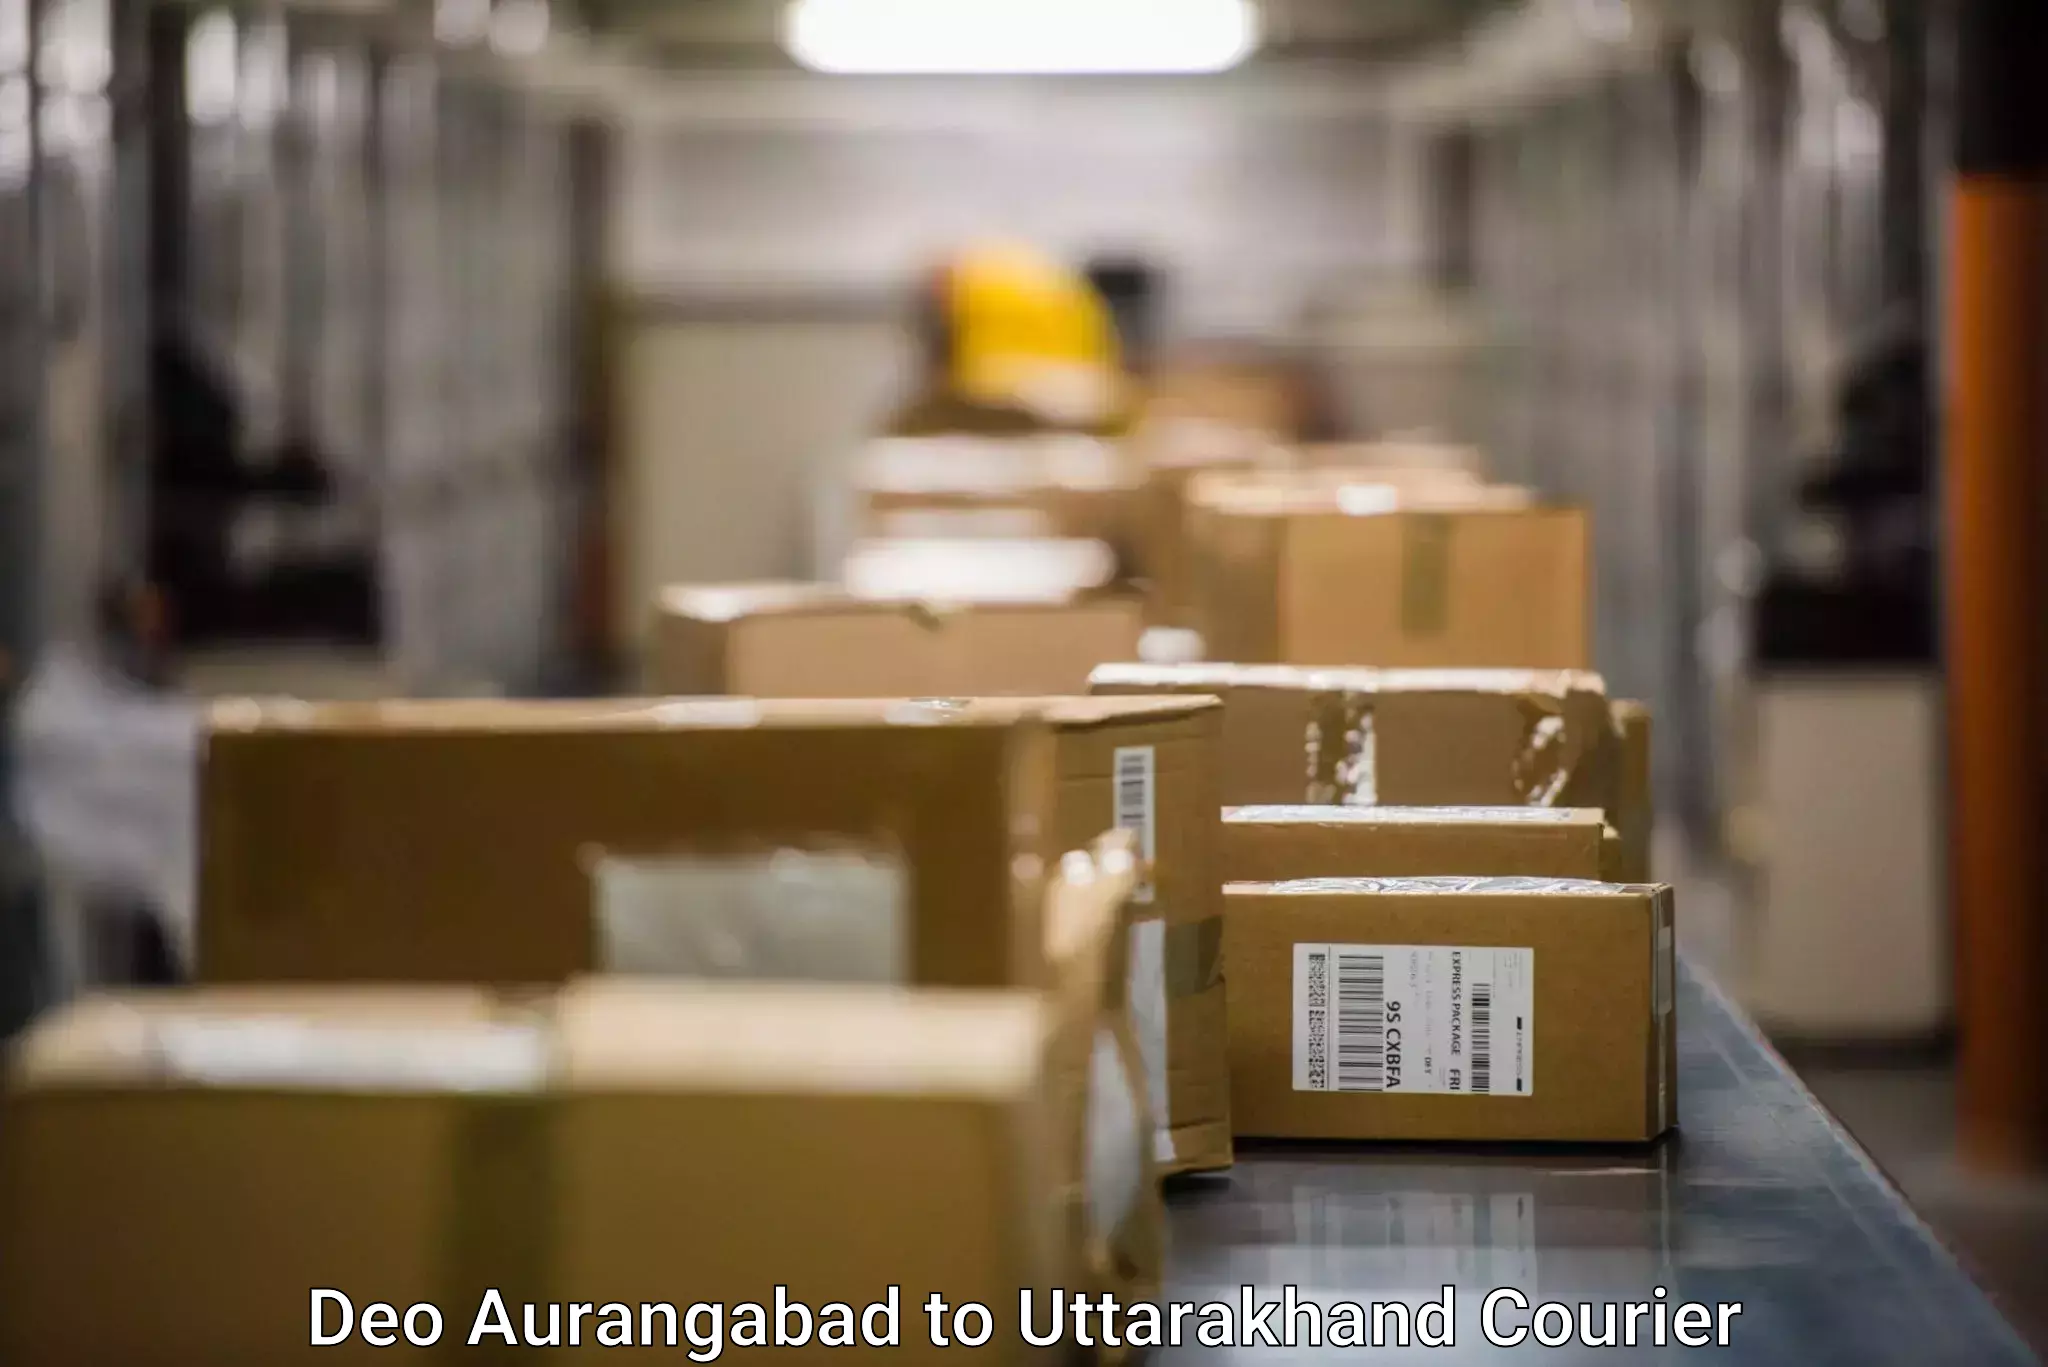 Same-day delivery solutions Deo Aurangabad to Rudraprayag